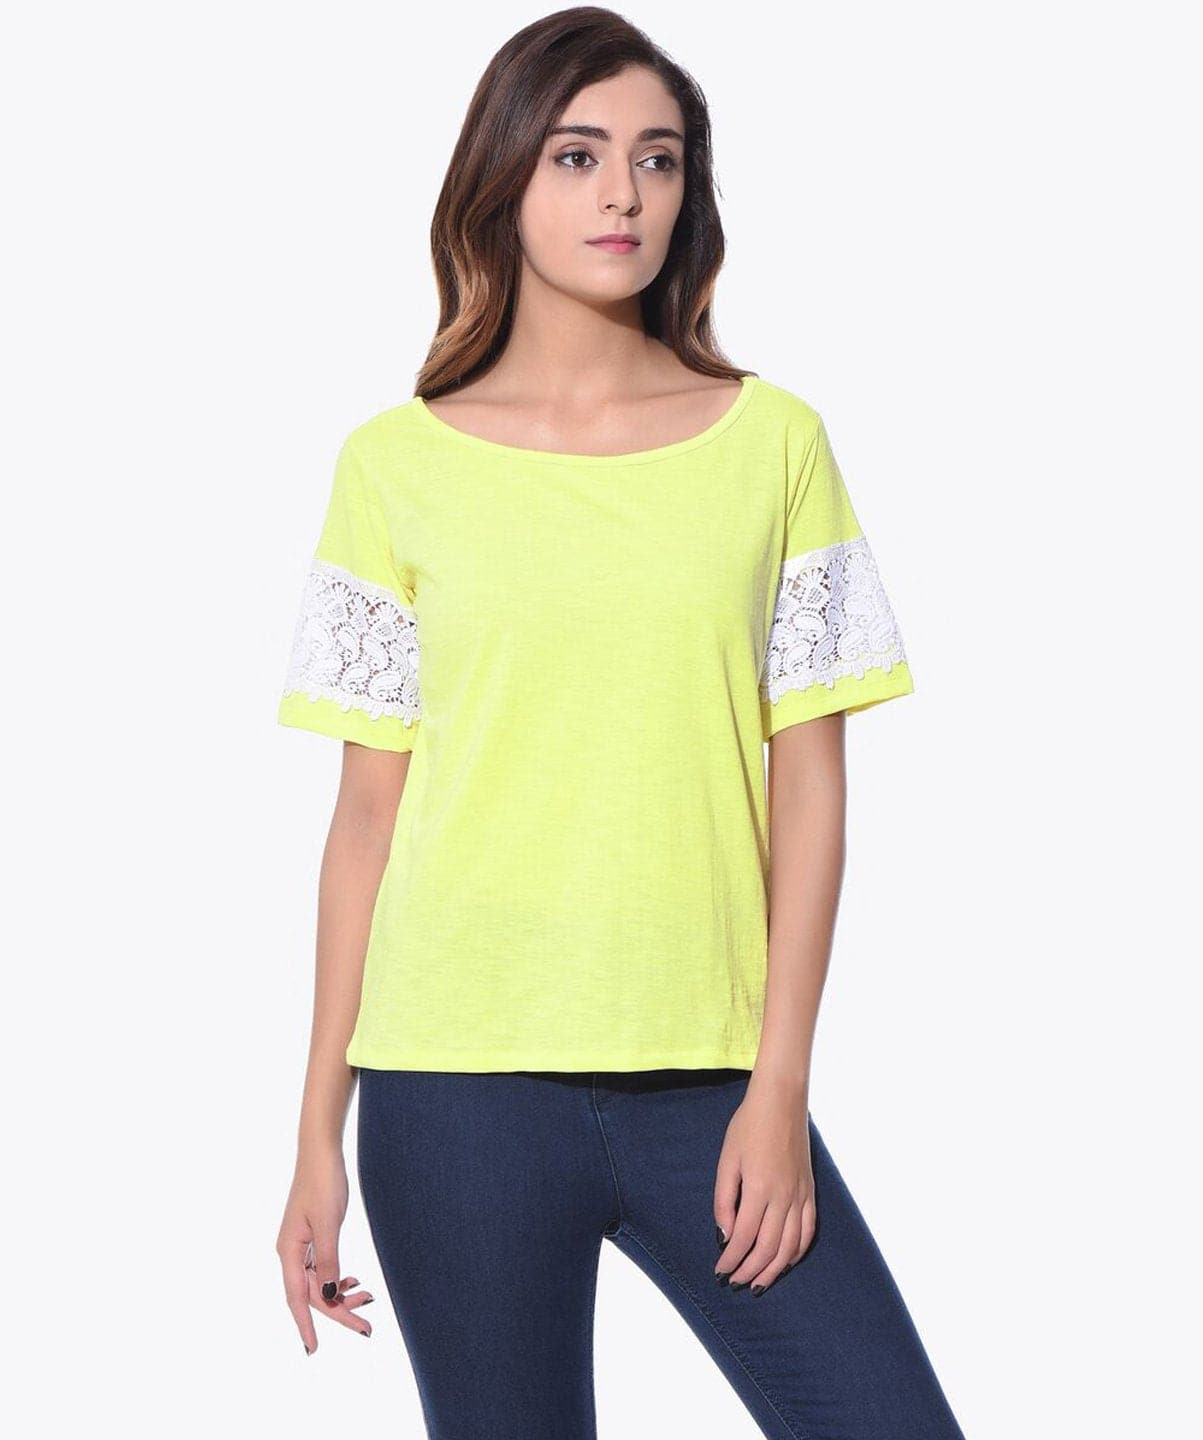 Uptownie Solid Yellow Lace Sleeved Cotton Top - Uptownie